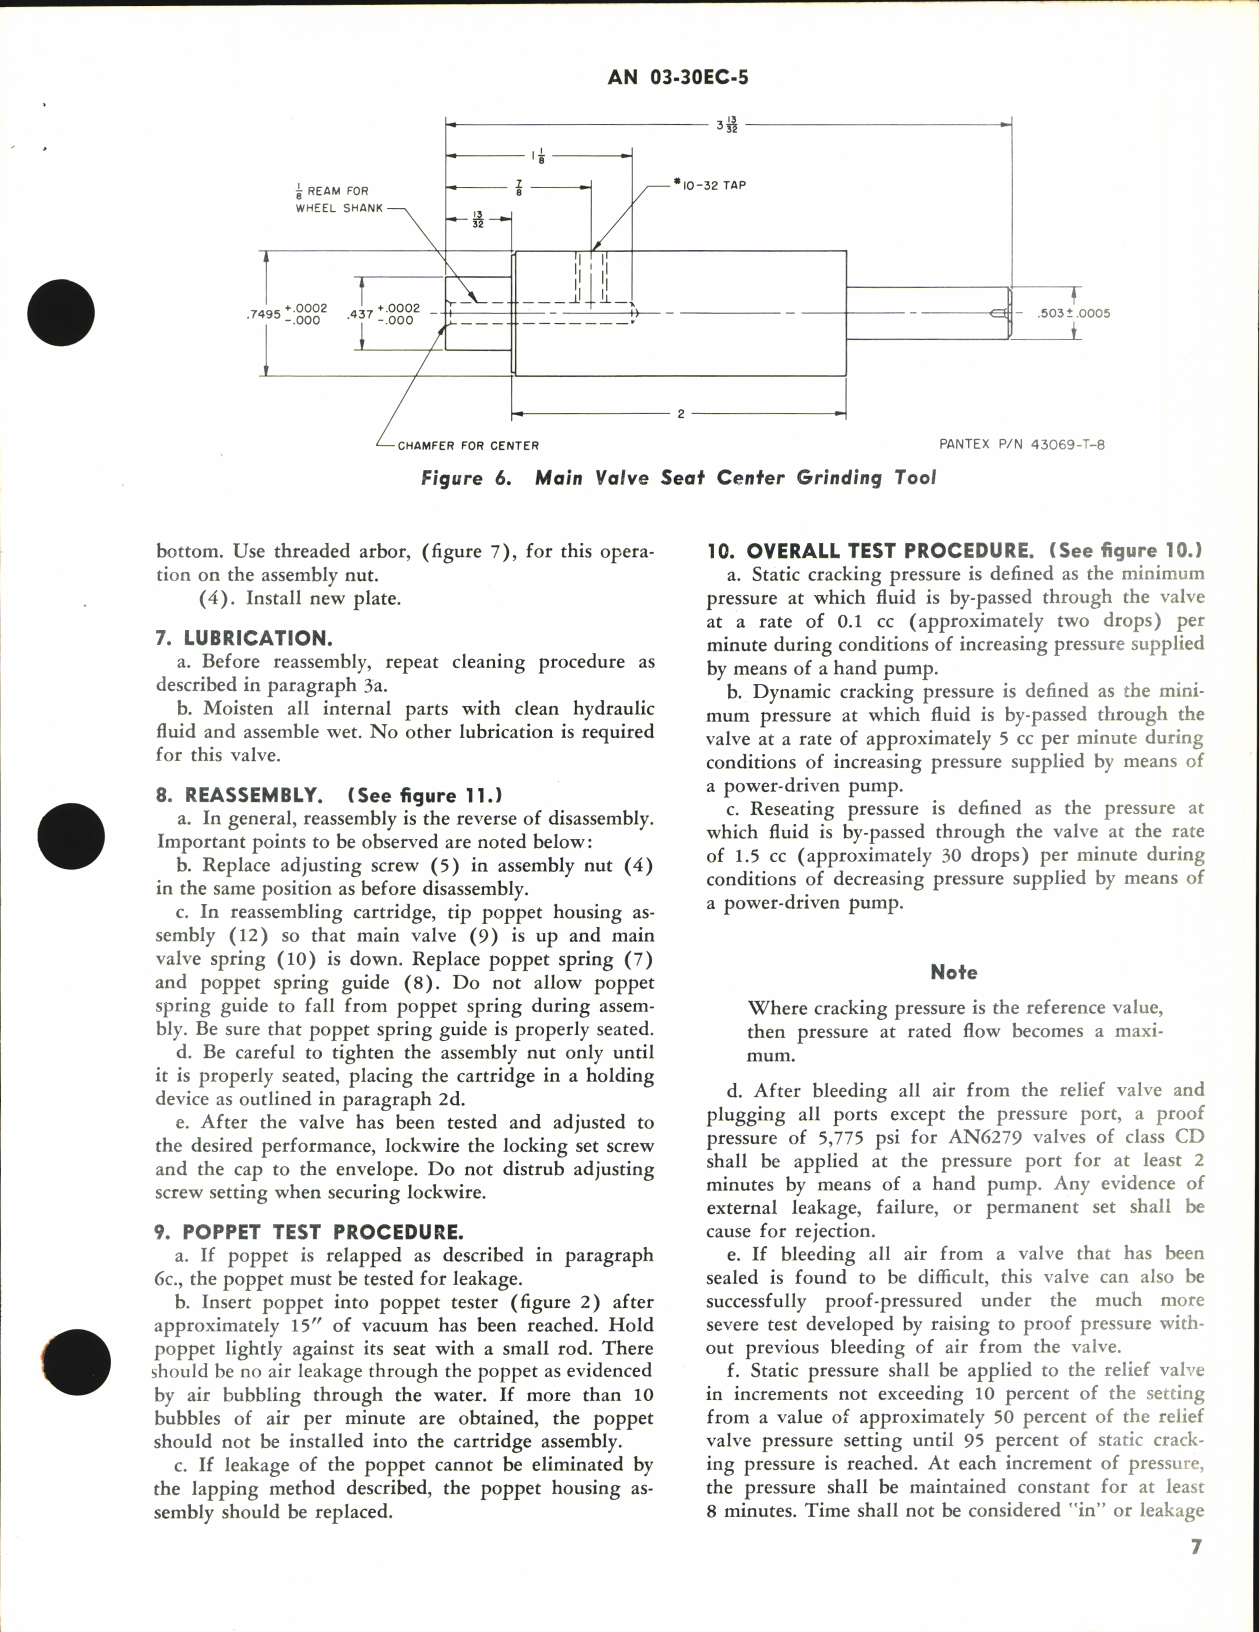 Sample page 7 from AirCorps Library document: Overhaul Instructions with Parts Breakdown for Hydraulic Relief Valve HPLV-A2